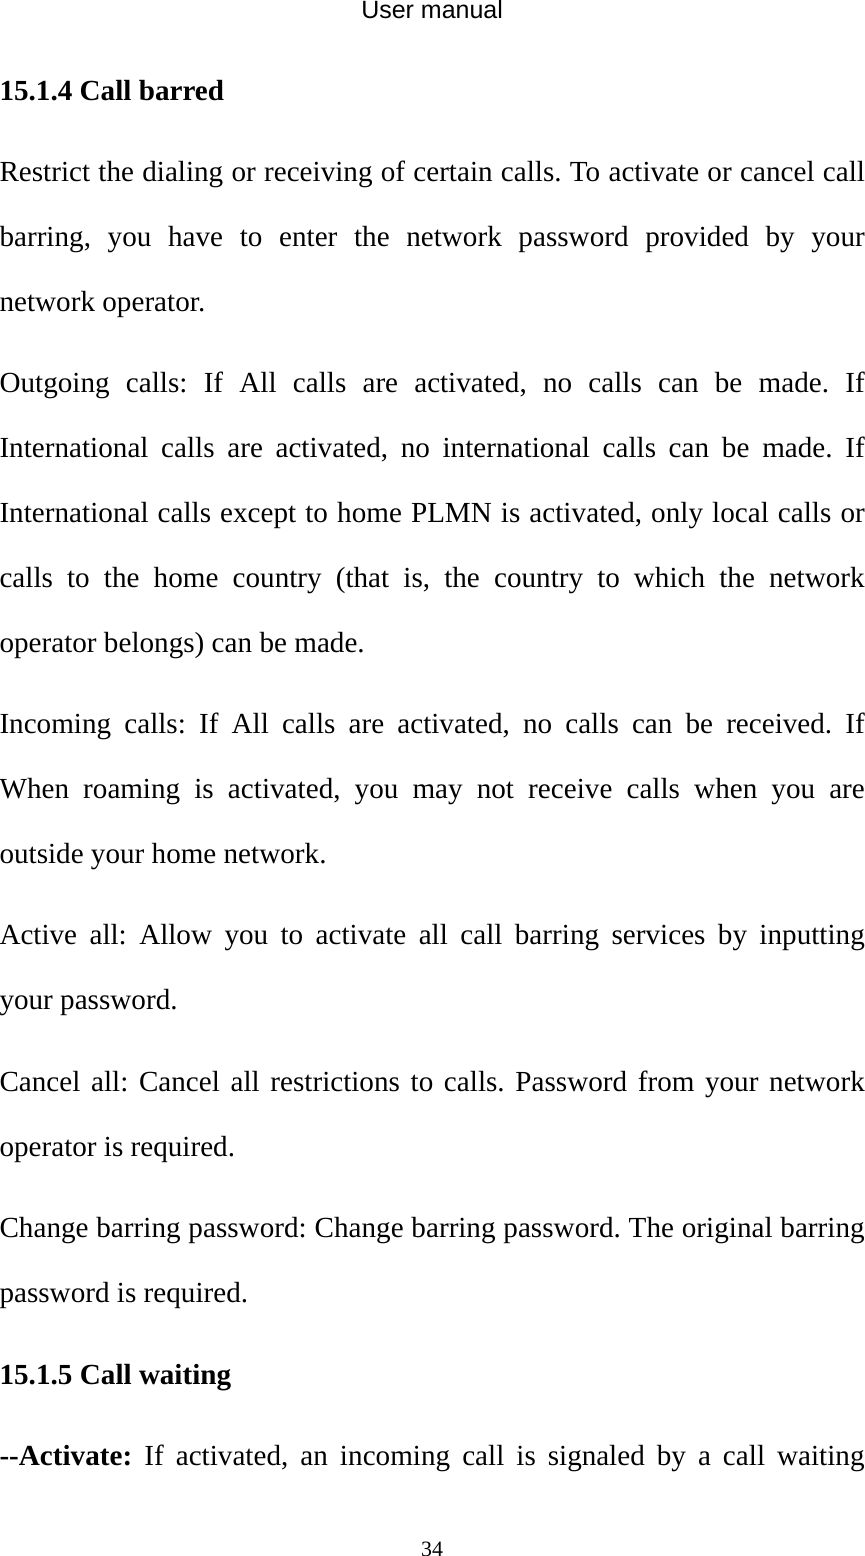 User manual  3415.1.4 Call barred Restrict the dialing or receiving of certain calls. To activate or cancel call barring, you have to enter the network password provided by your network operator. Outgoing calls: If All calls are activated, no calls can be made. If International calls are activated, no international calls can be made. If International calls except to home PLMN is activated, only local calls or calls to the home country (that is, the country to which the network operator belongs) can be made. Incoming calls: If All calls are activated, no calls can be received. If When roaming is activated, you may not receive calls when you are outside your home network. Active all: Allow you to activate all call barring services by inputting your password. Cancel all: Cancel all restrictions to calls. Password from your network operator is required. Change barring password: Change barring password. The original barring password is required. 15.1.5 Call waiting --Activate: If activated, an incoming call is signaled by a call waiting 